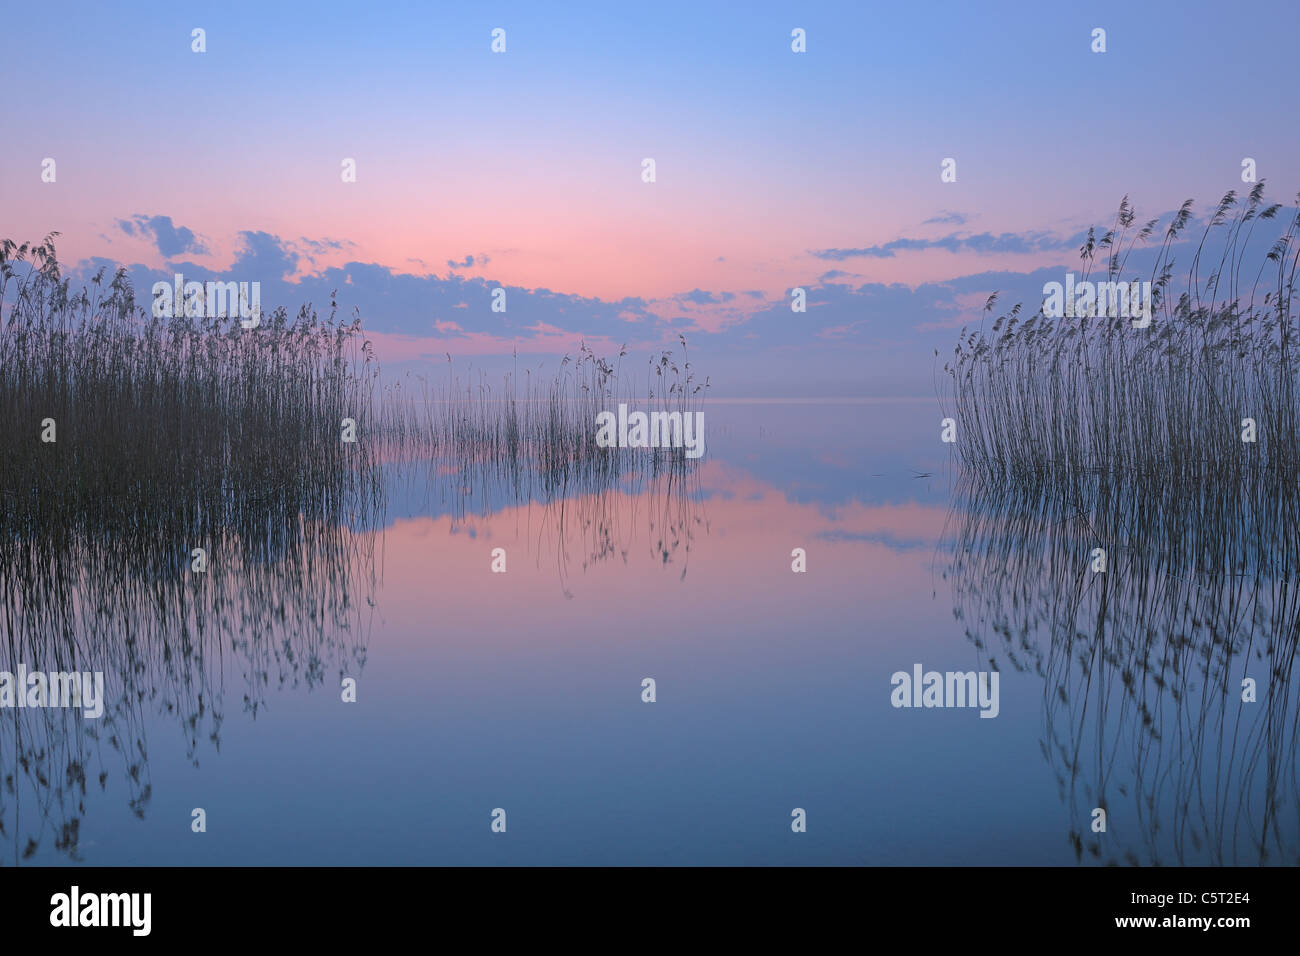 Germany, Mecklenburg-Vorpommern, Mecklenburger Seenplatte, Plau am See, View of sunrise with reeds and reflection in lake Stock Photo